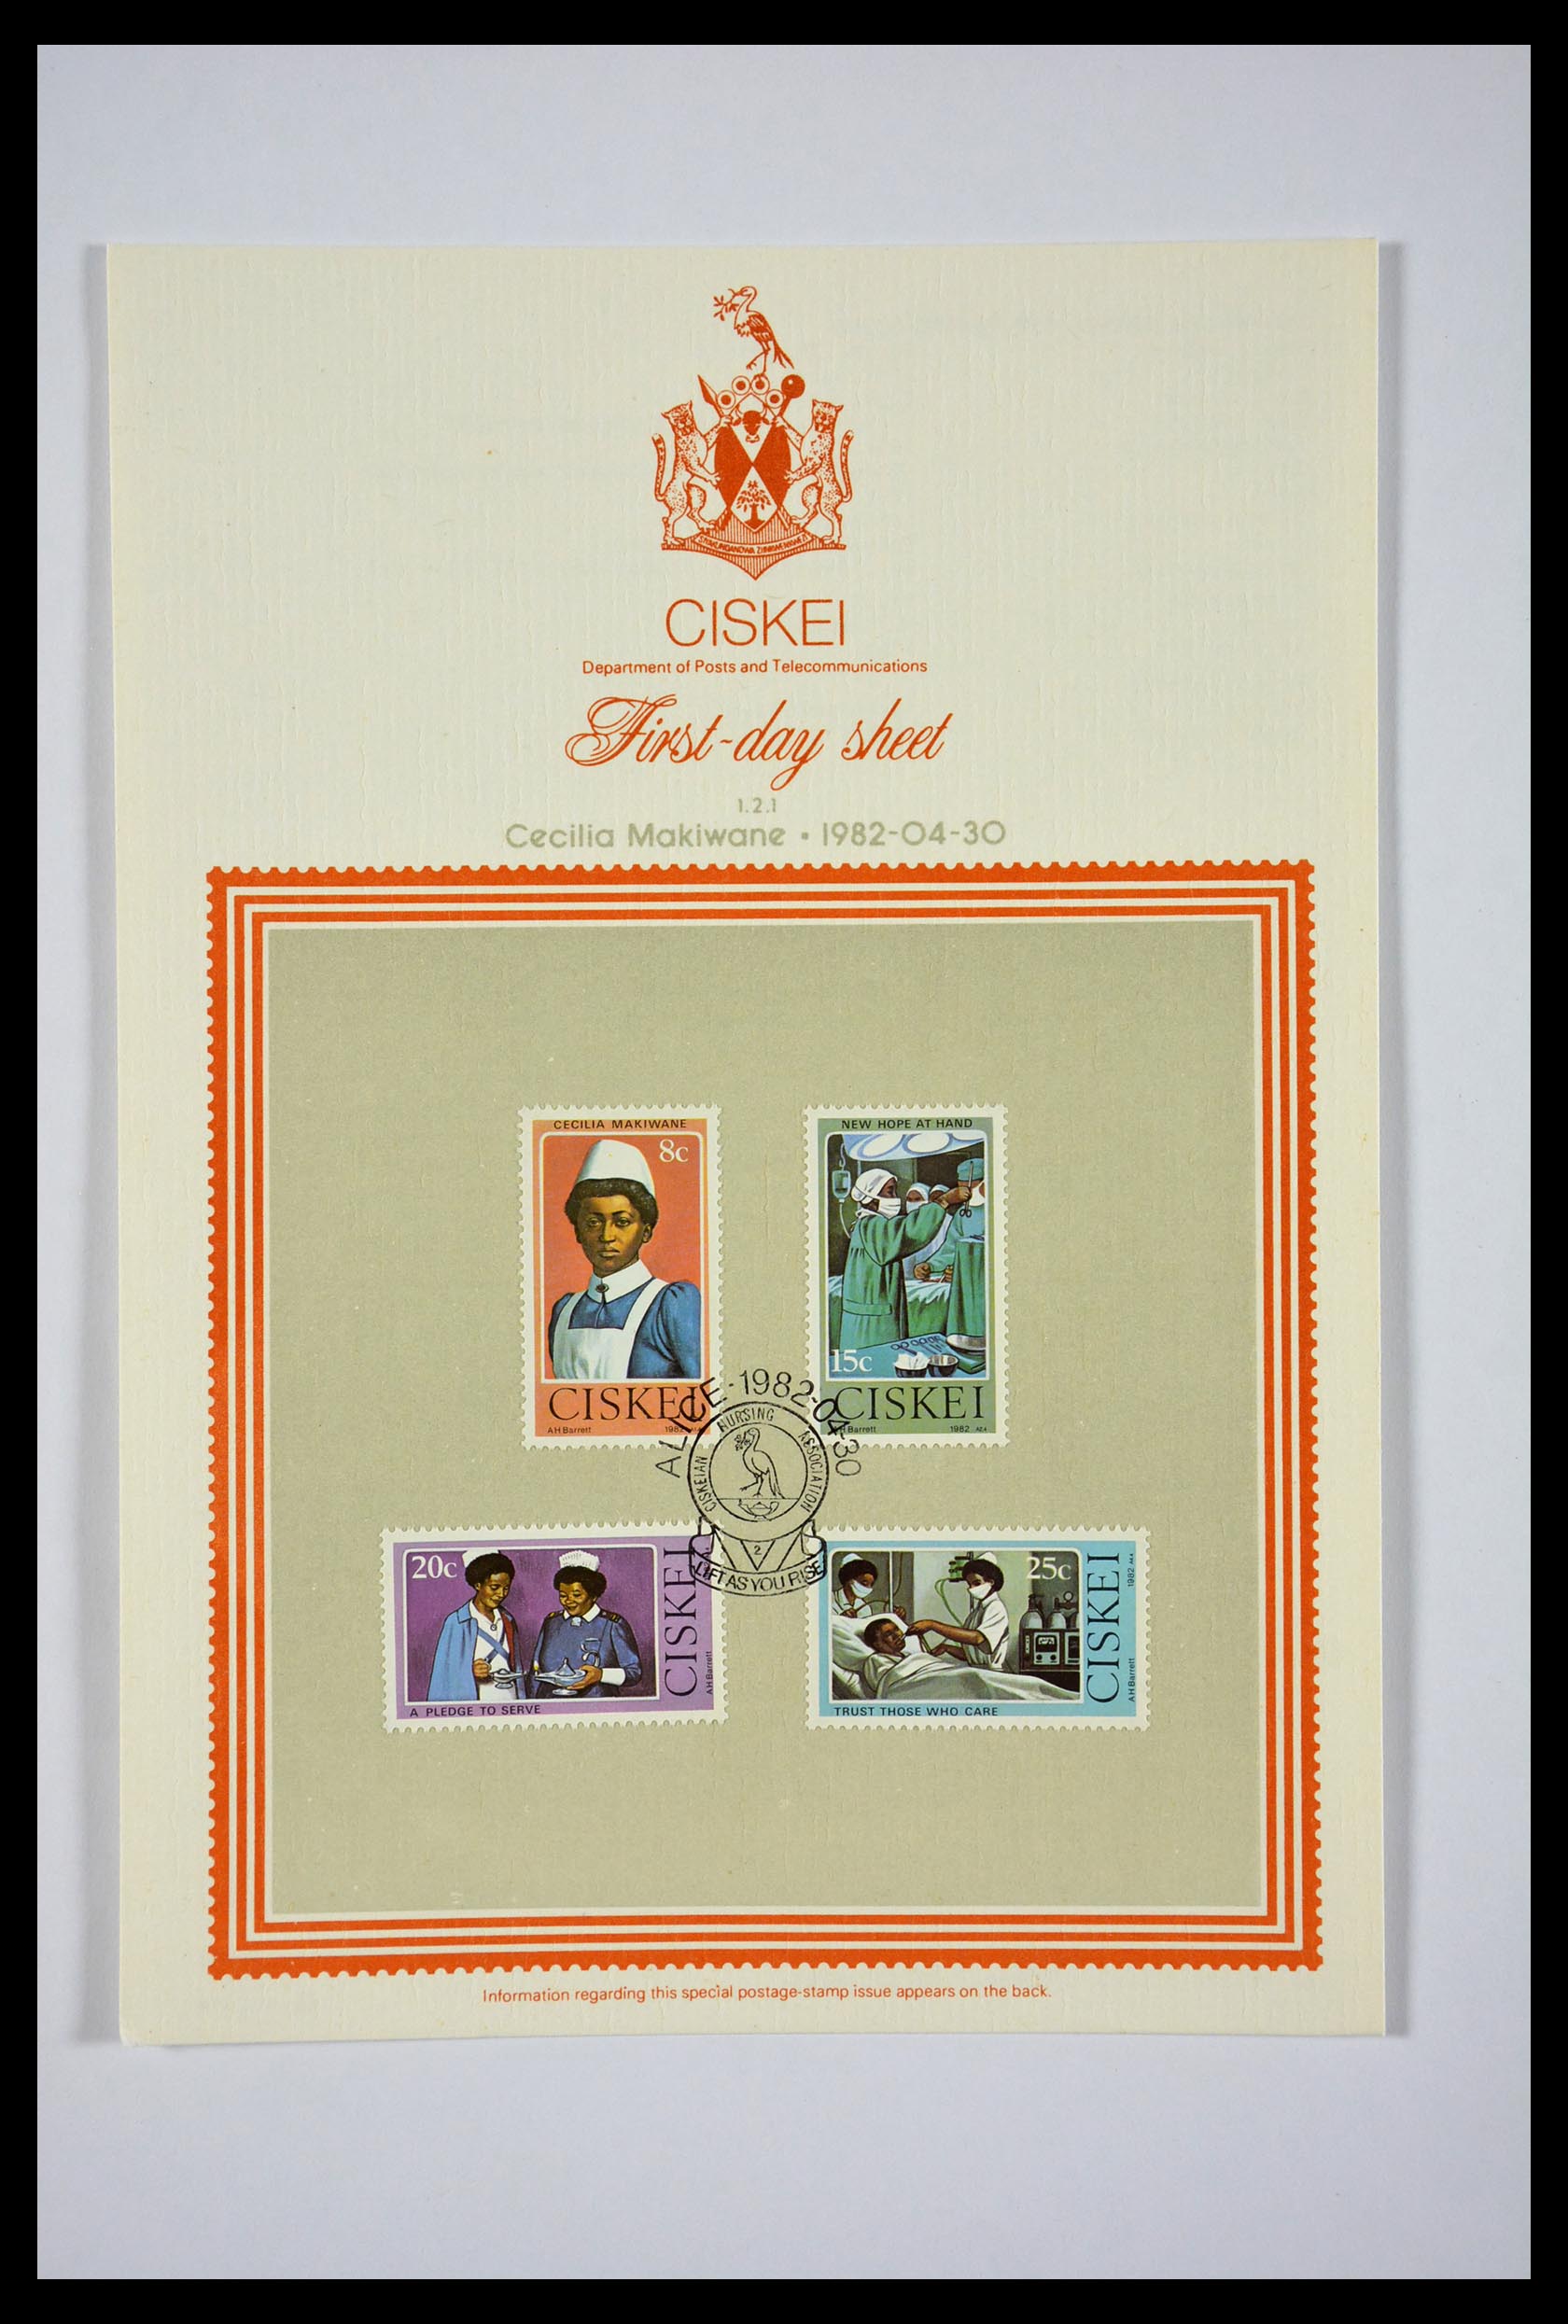 29356 033 - 29356 South Africa homelands first day covers 1979-1991.